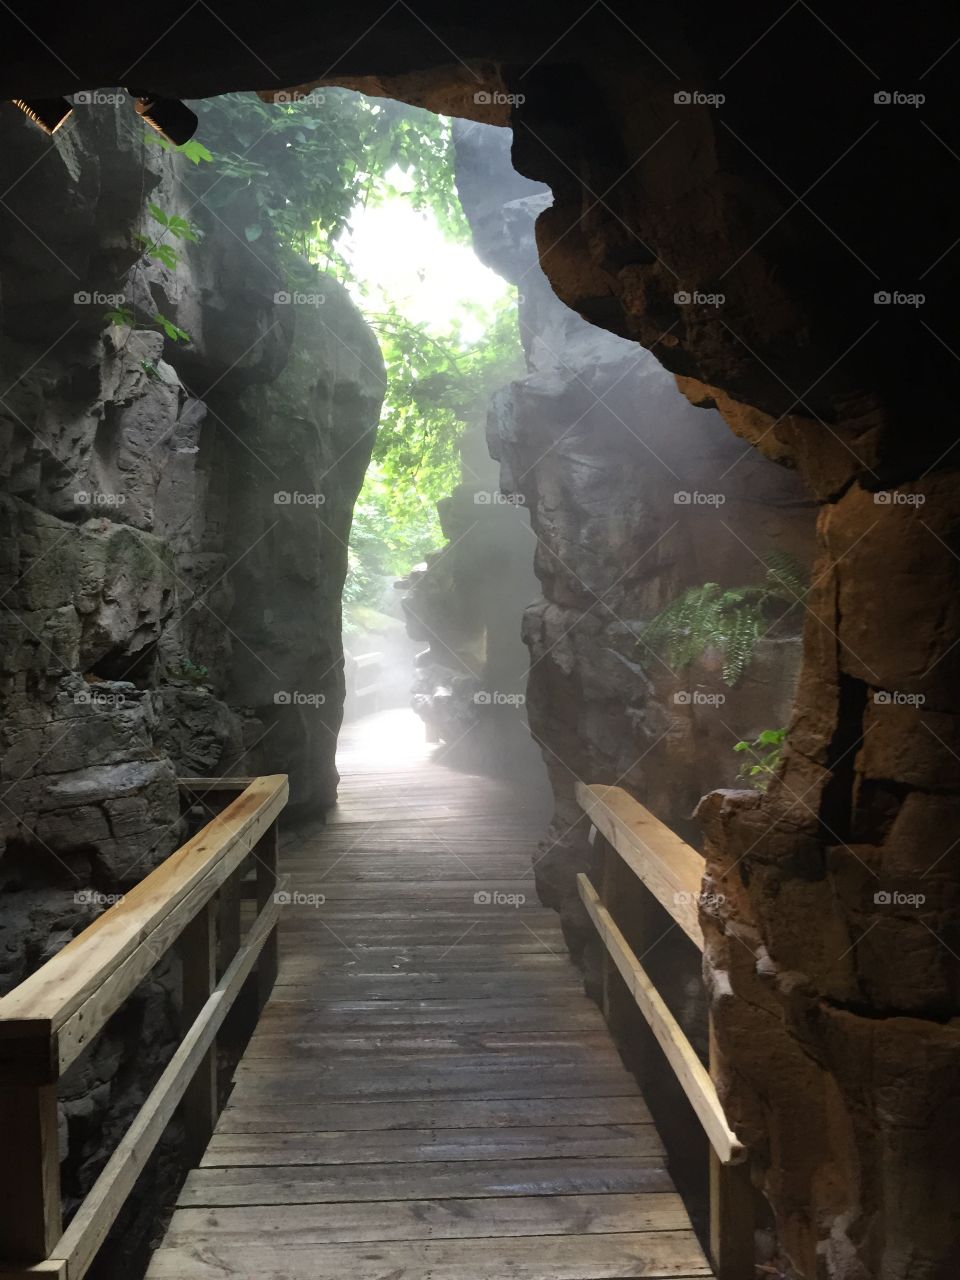 Light at the end of the tunnel. Bridge thru a cave